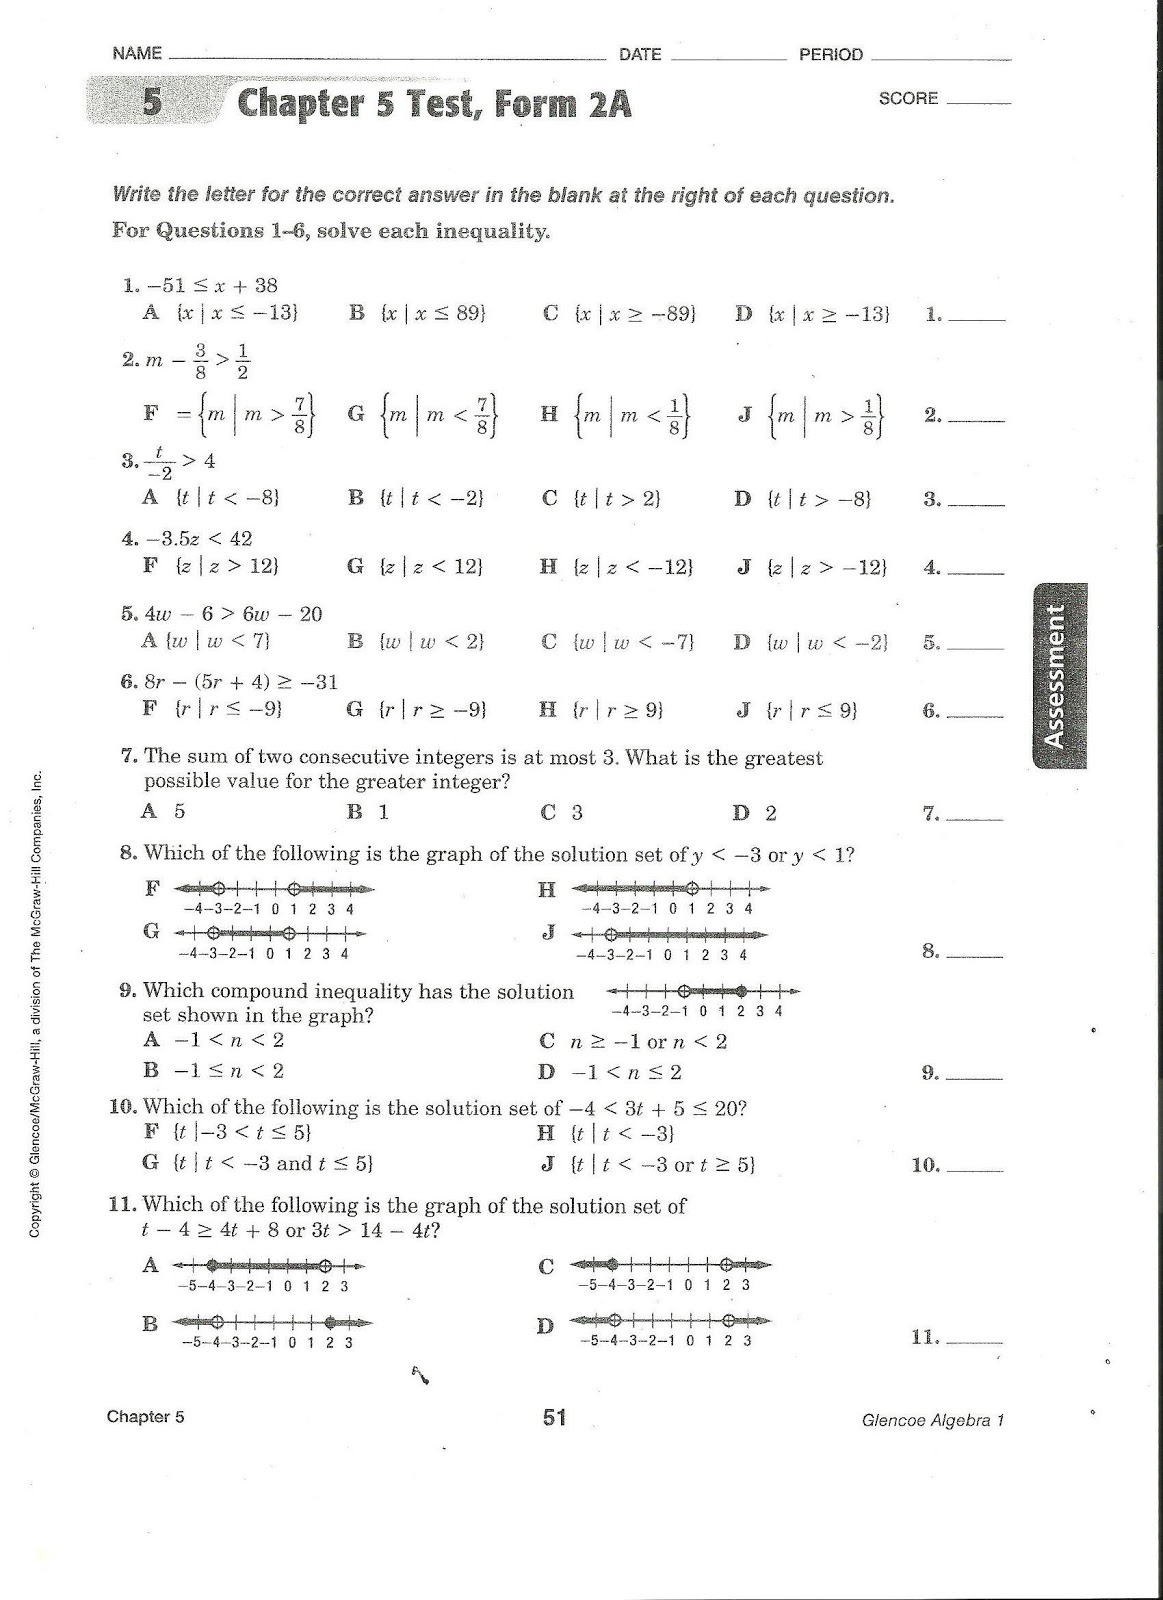 Coach Gober S Algebra Class Chapter 5 Test Form 2a Assigned January 15